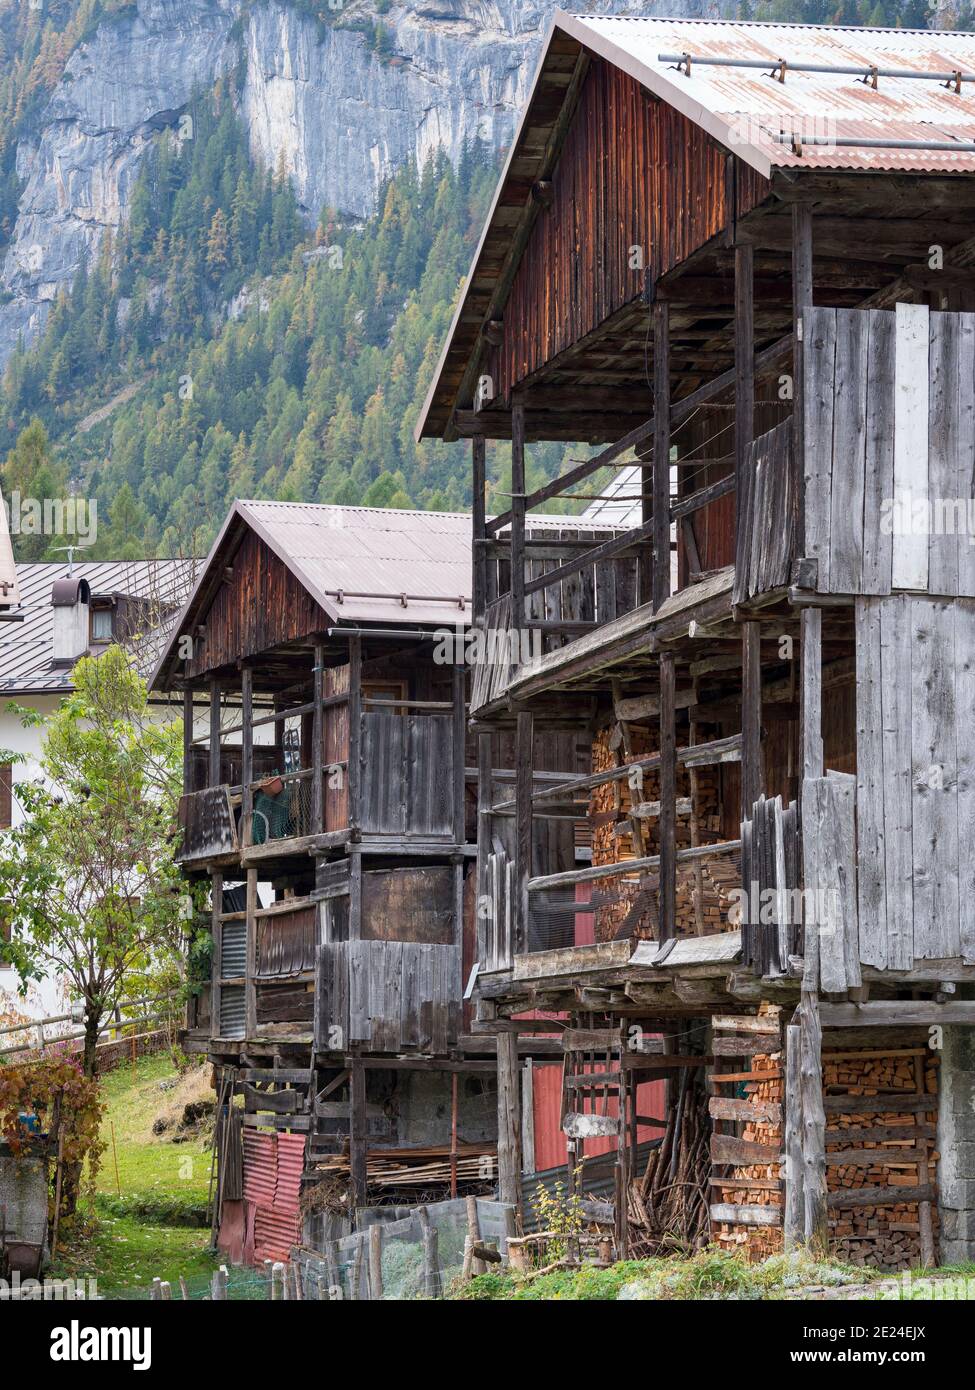 Typical barn called Tabia. Village Gares , traditional alpine architecture in valley Valle di Gares,  Pale di San Martino. Pala is part of the UNESCO Stock Photo